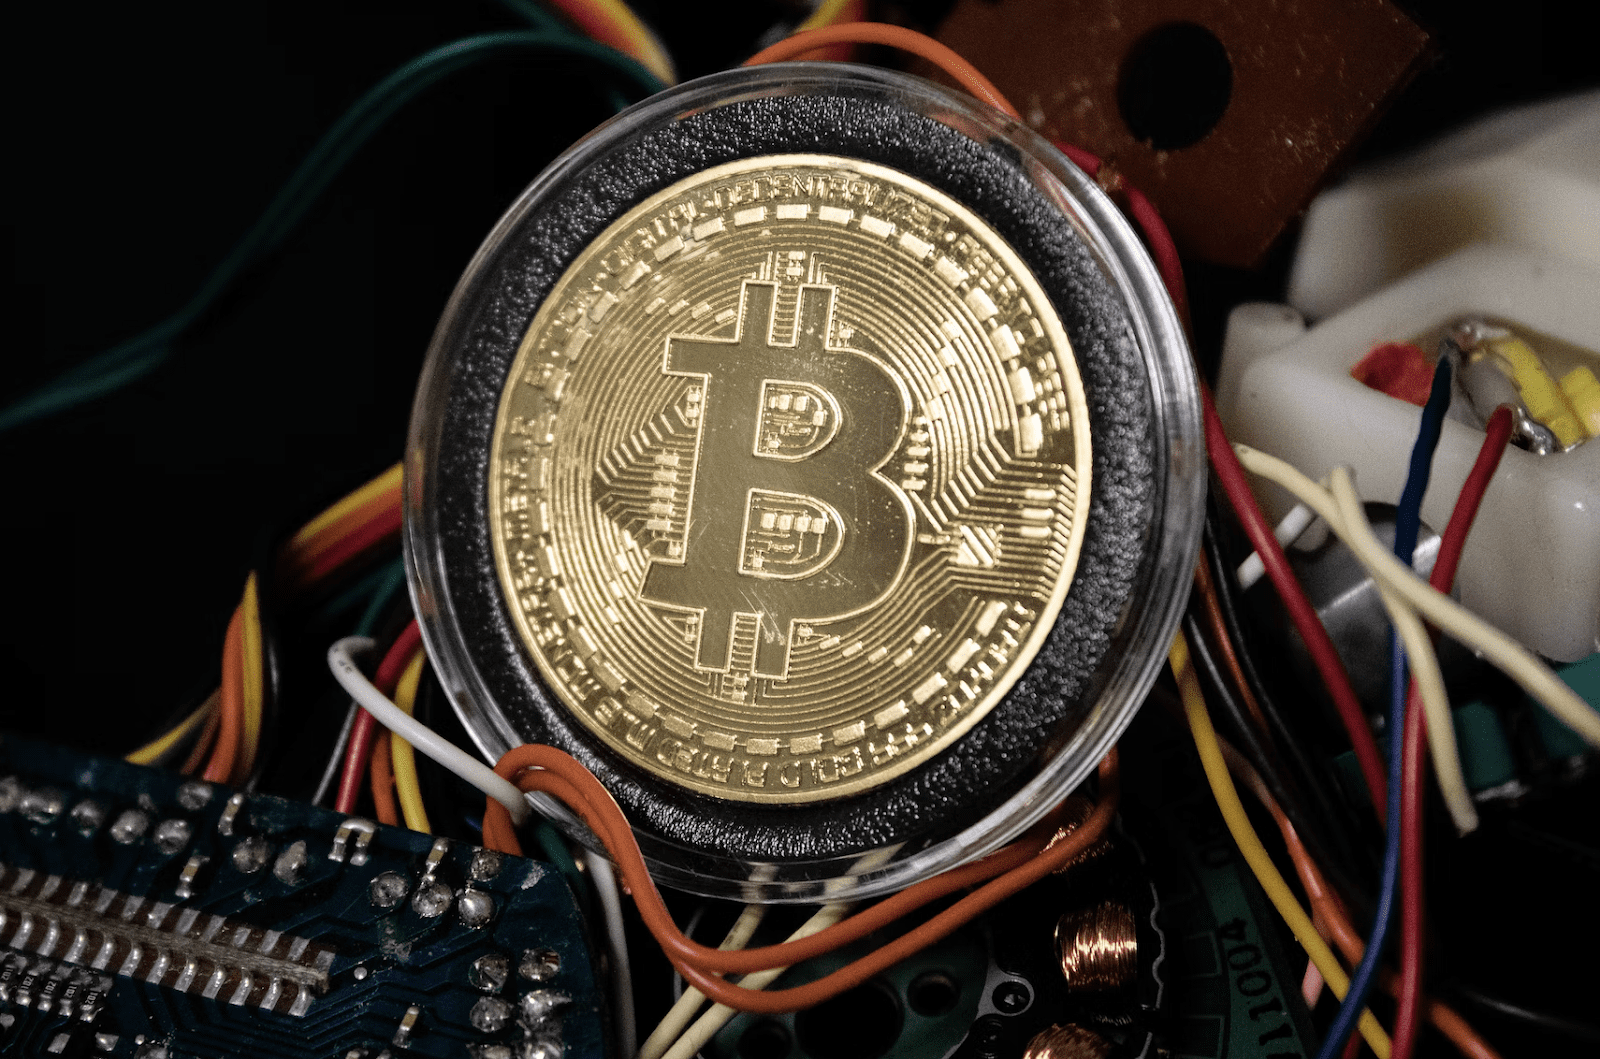 Does Bitcoin's recent positive leap signify the end of crypto winter?